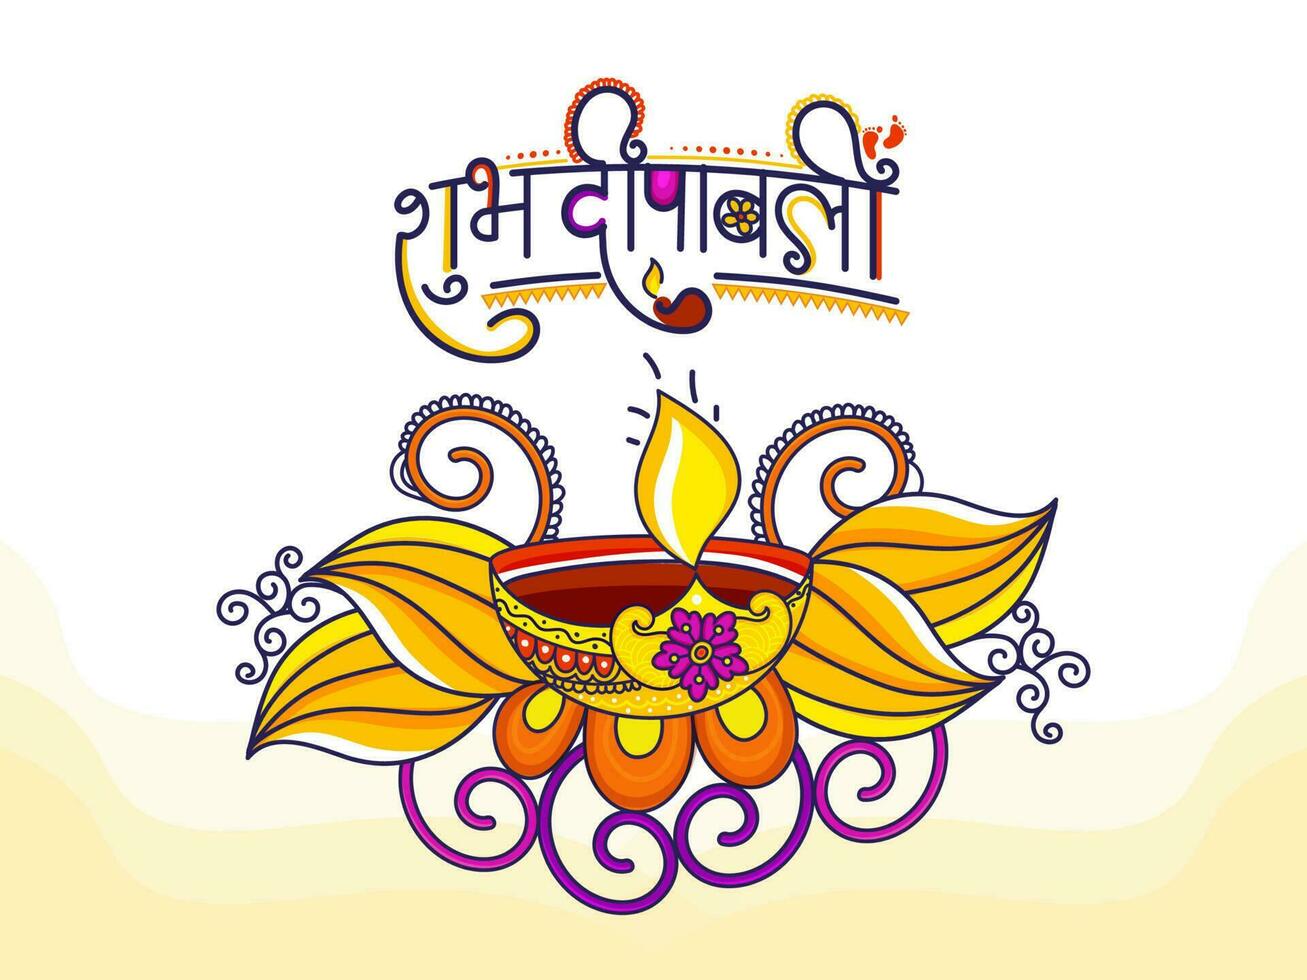 Happy Diwali Font Written In Hindi Language With Lit Oil Lamp On White And Yellow Background. vector